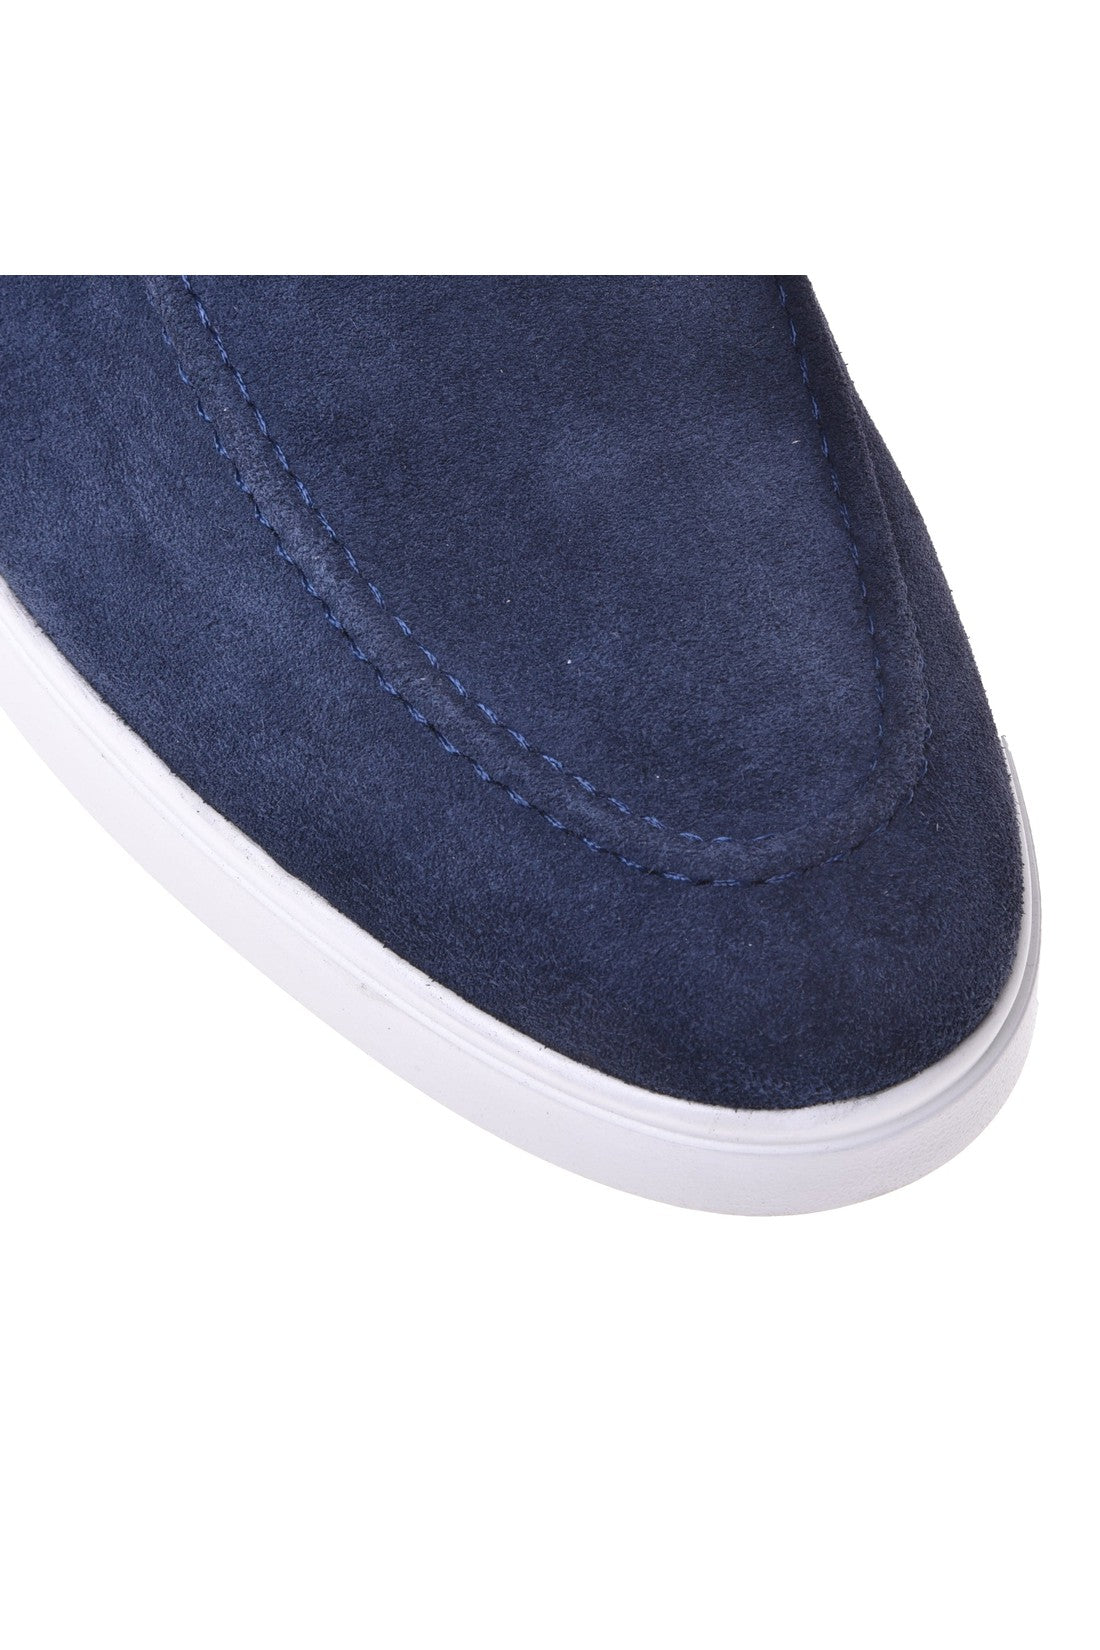 Loafer in blue suede leather